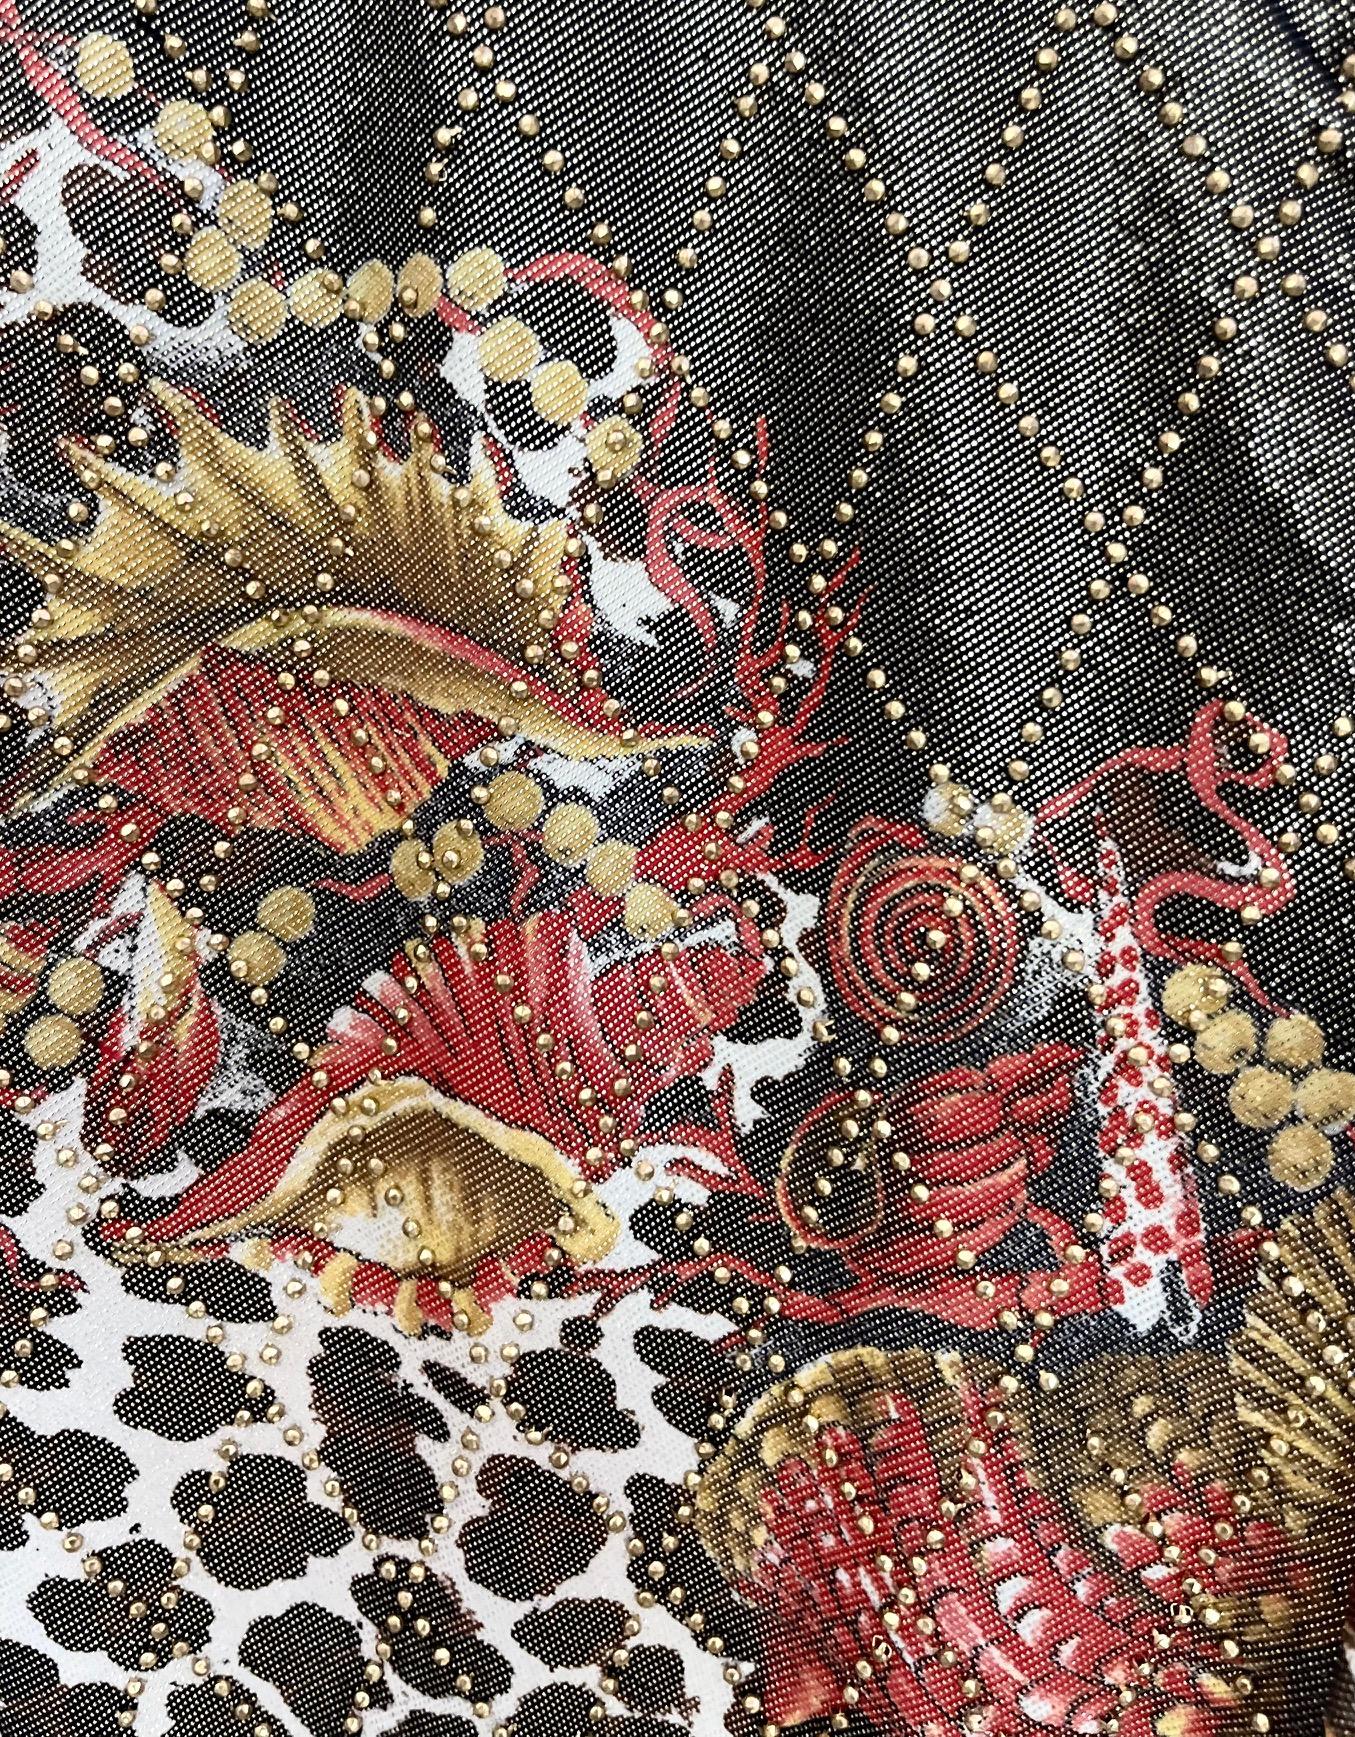 SEASHELL BAROQUE LEGGINGS from MIAMI MANSION GIANNI VERSACE PERSONAL COLLECTION In New Condition For Sale In Montgomery, TX